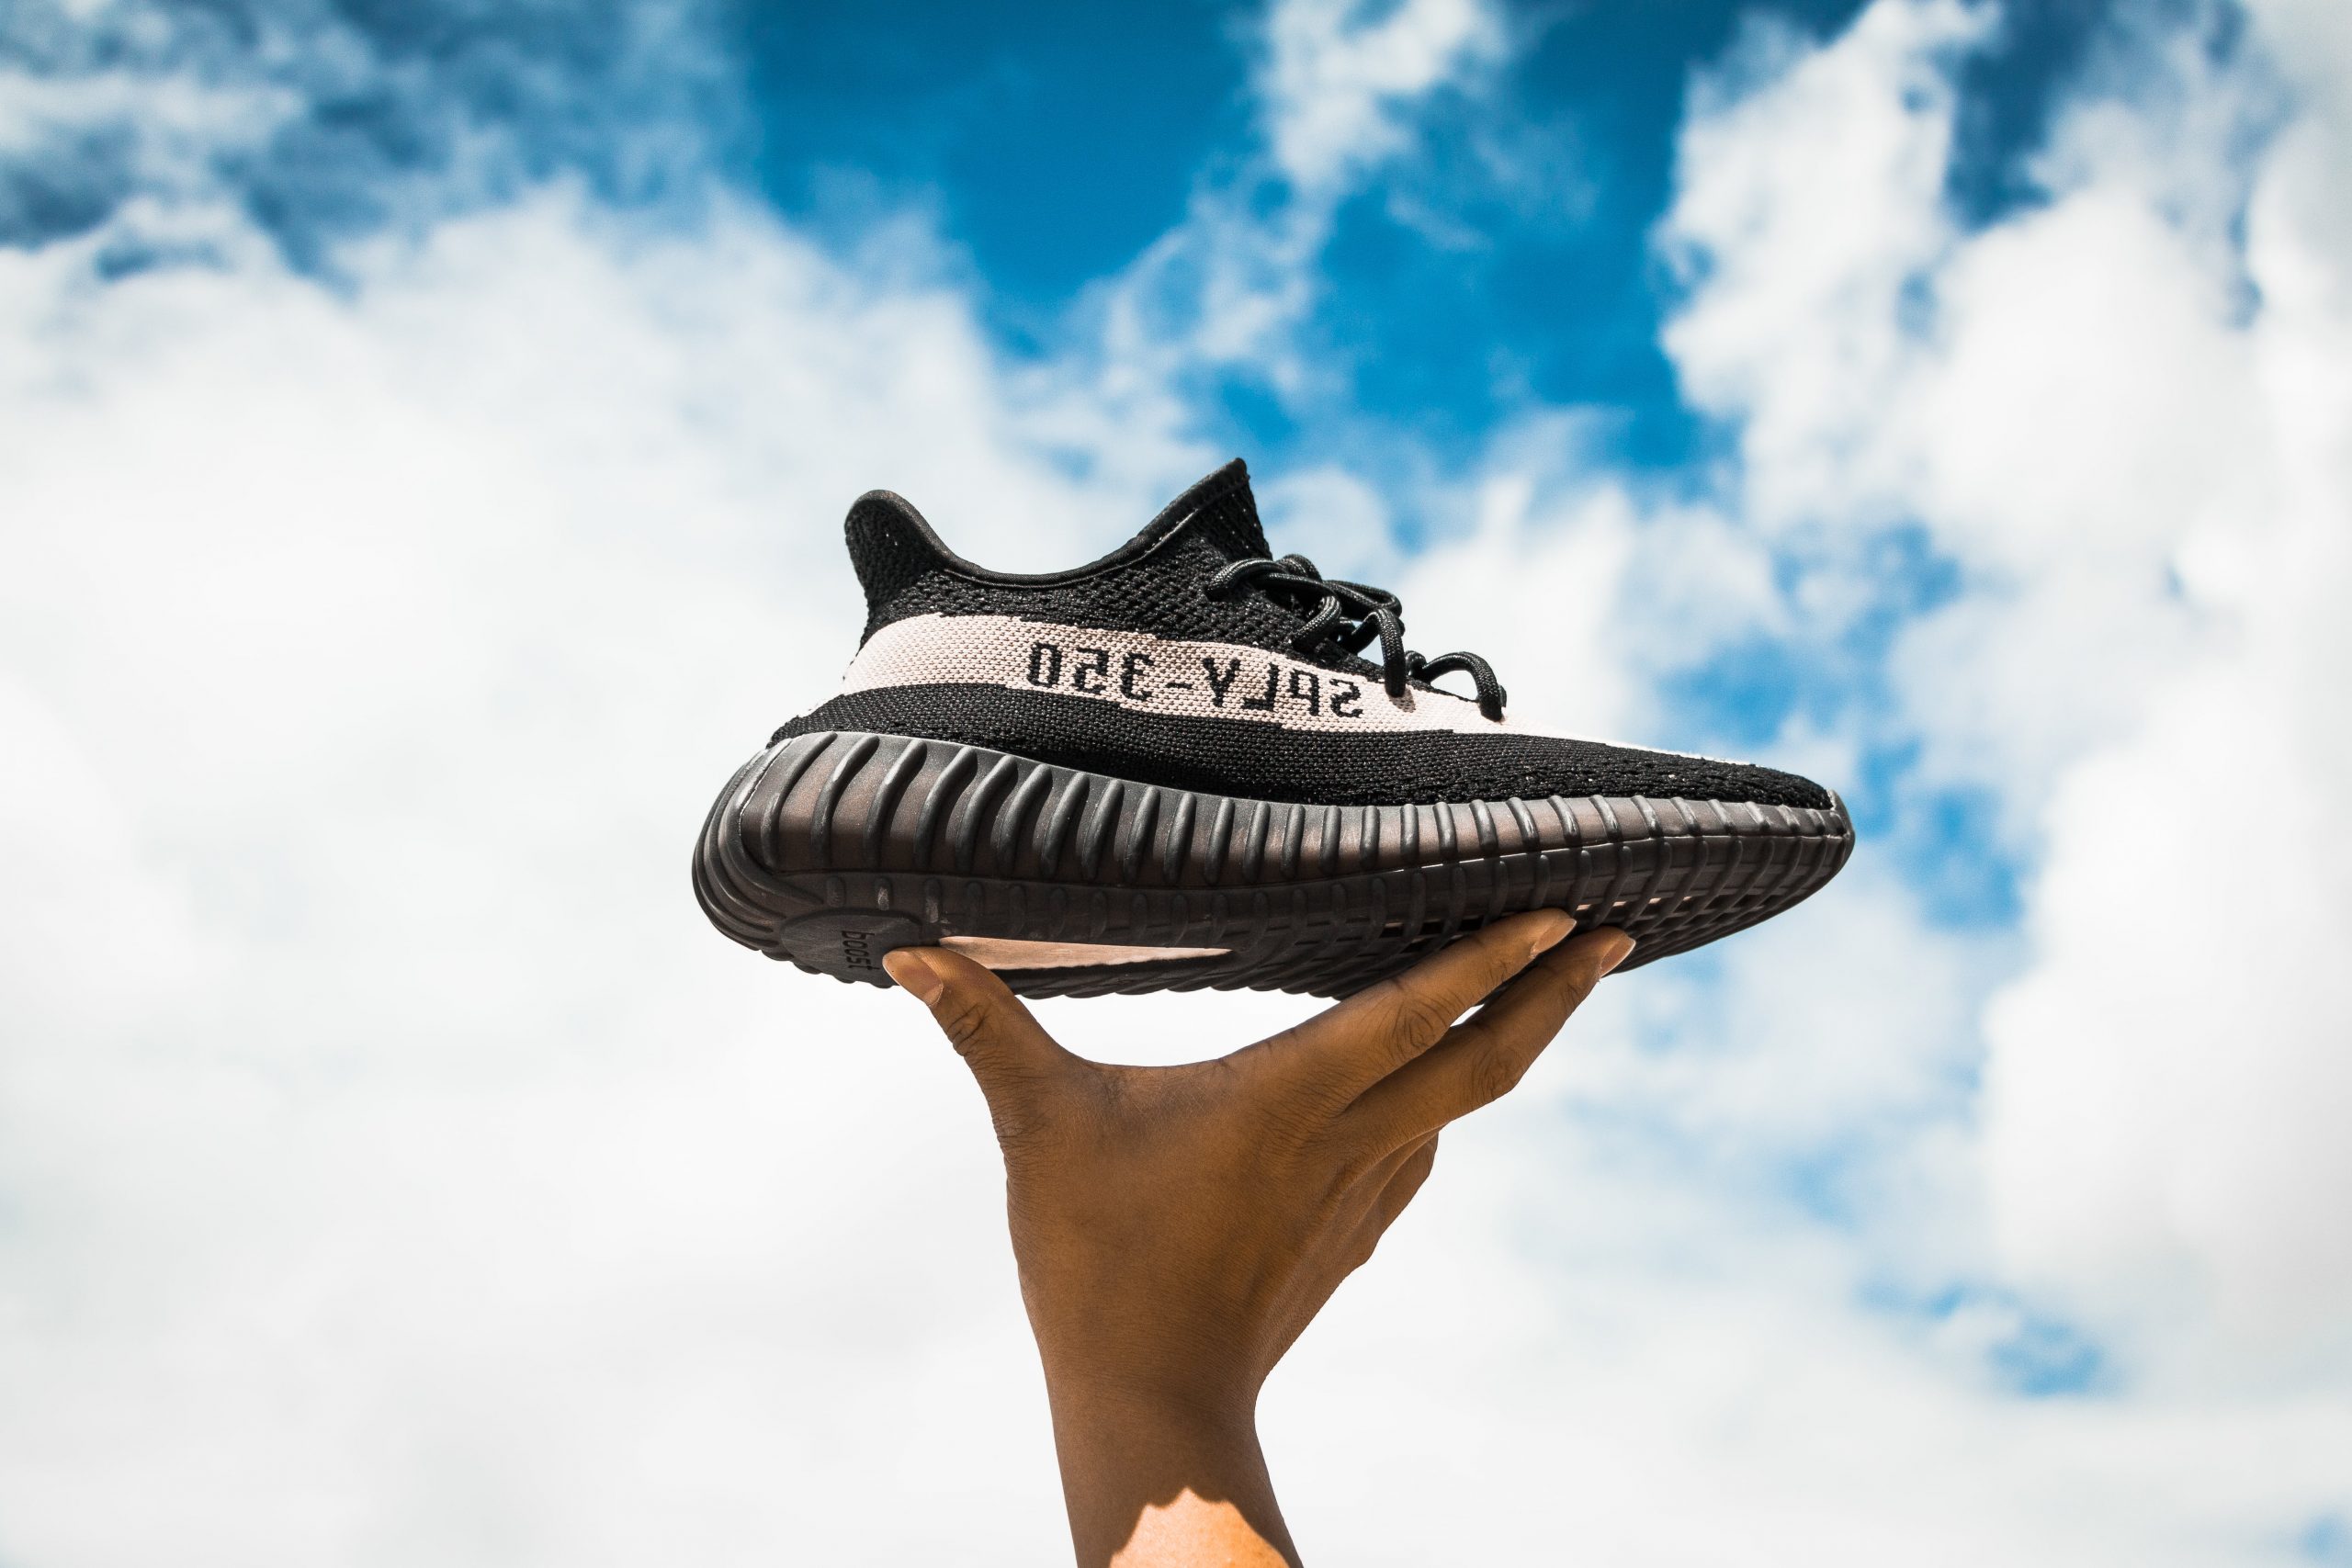 Yeezy Boost 350 V2 Wallpapers